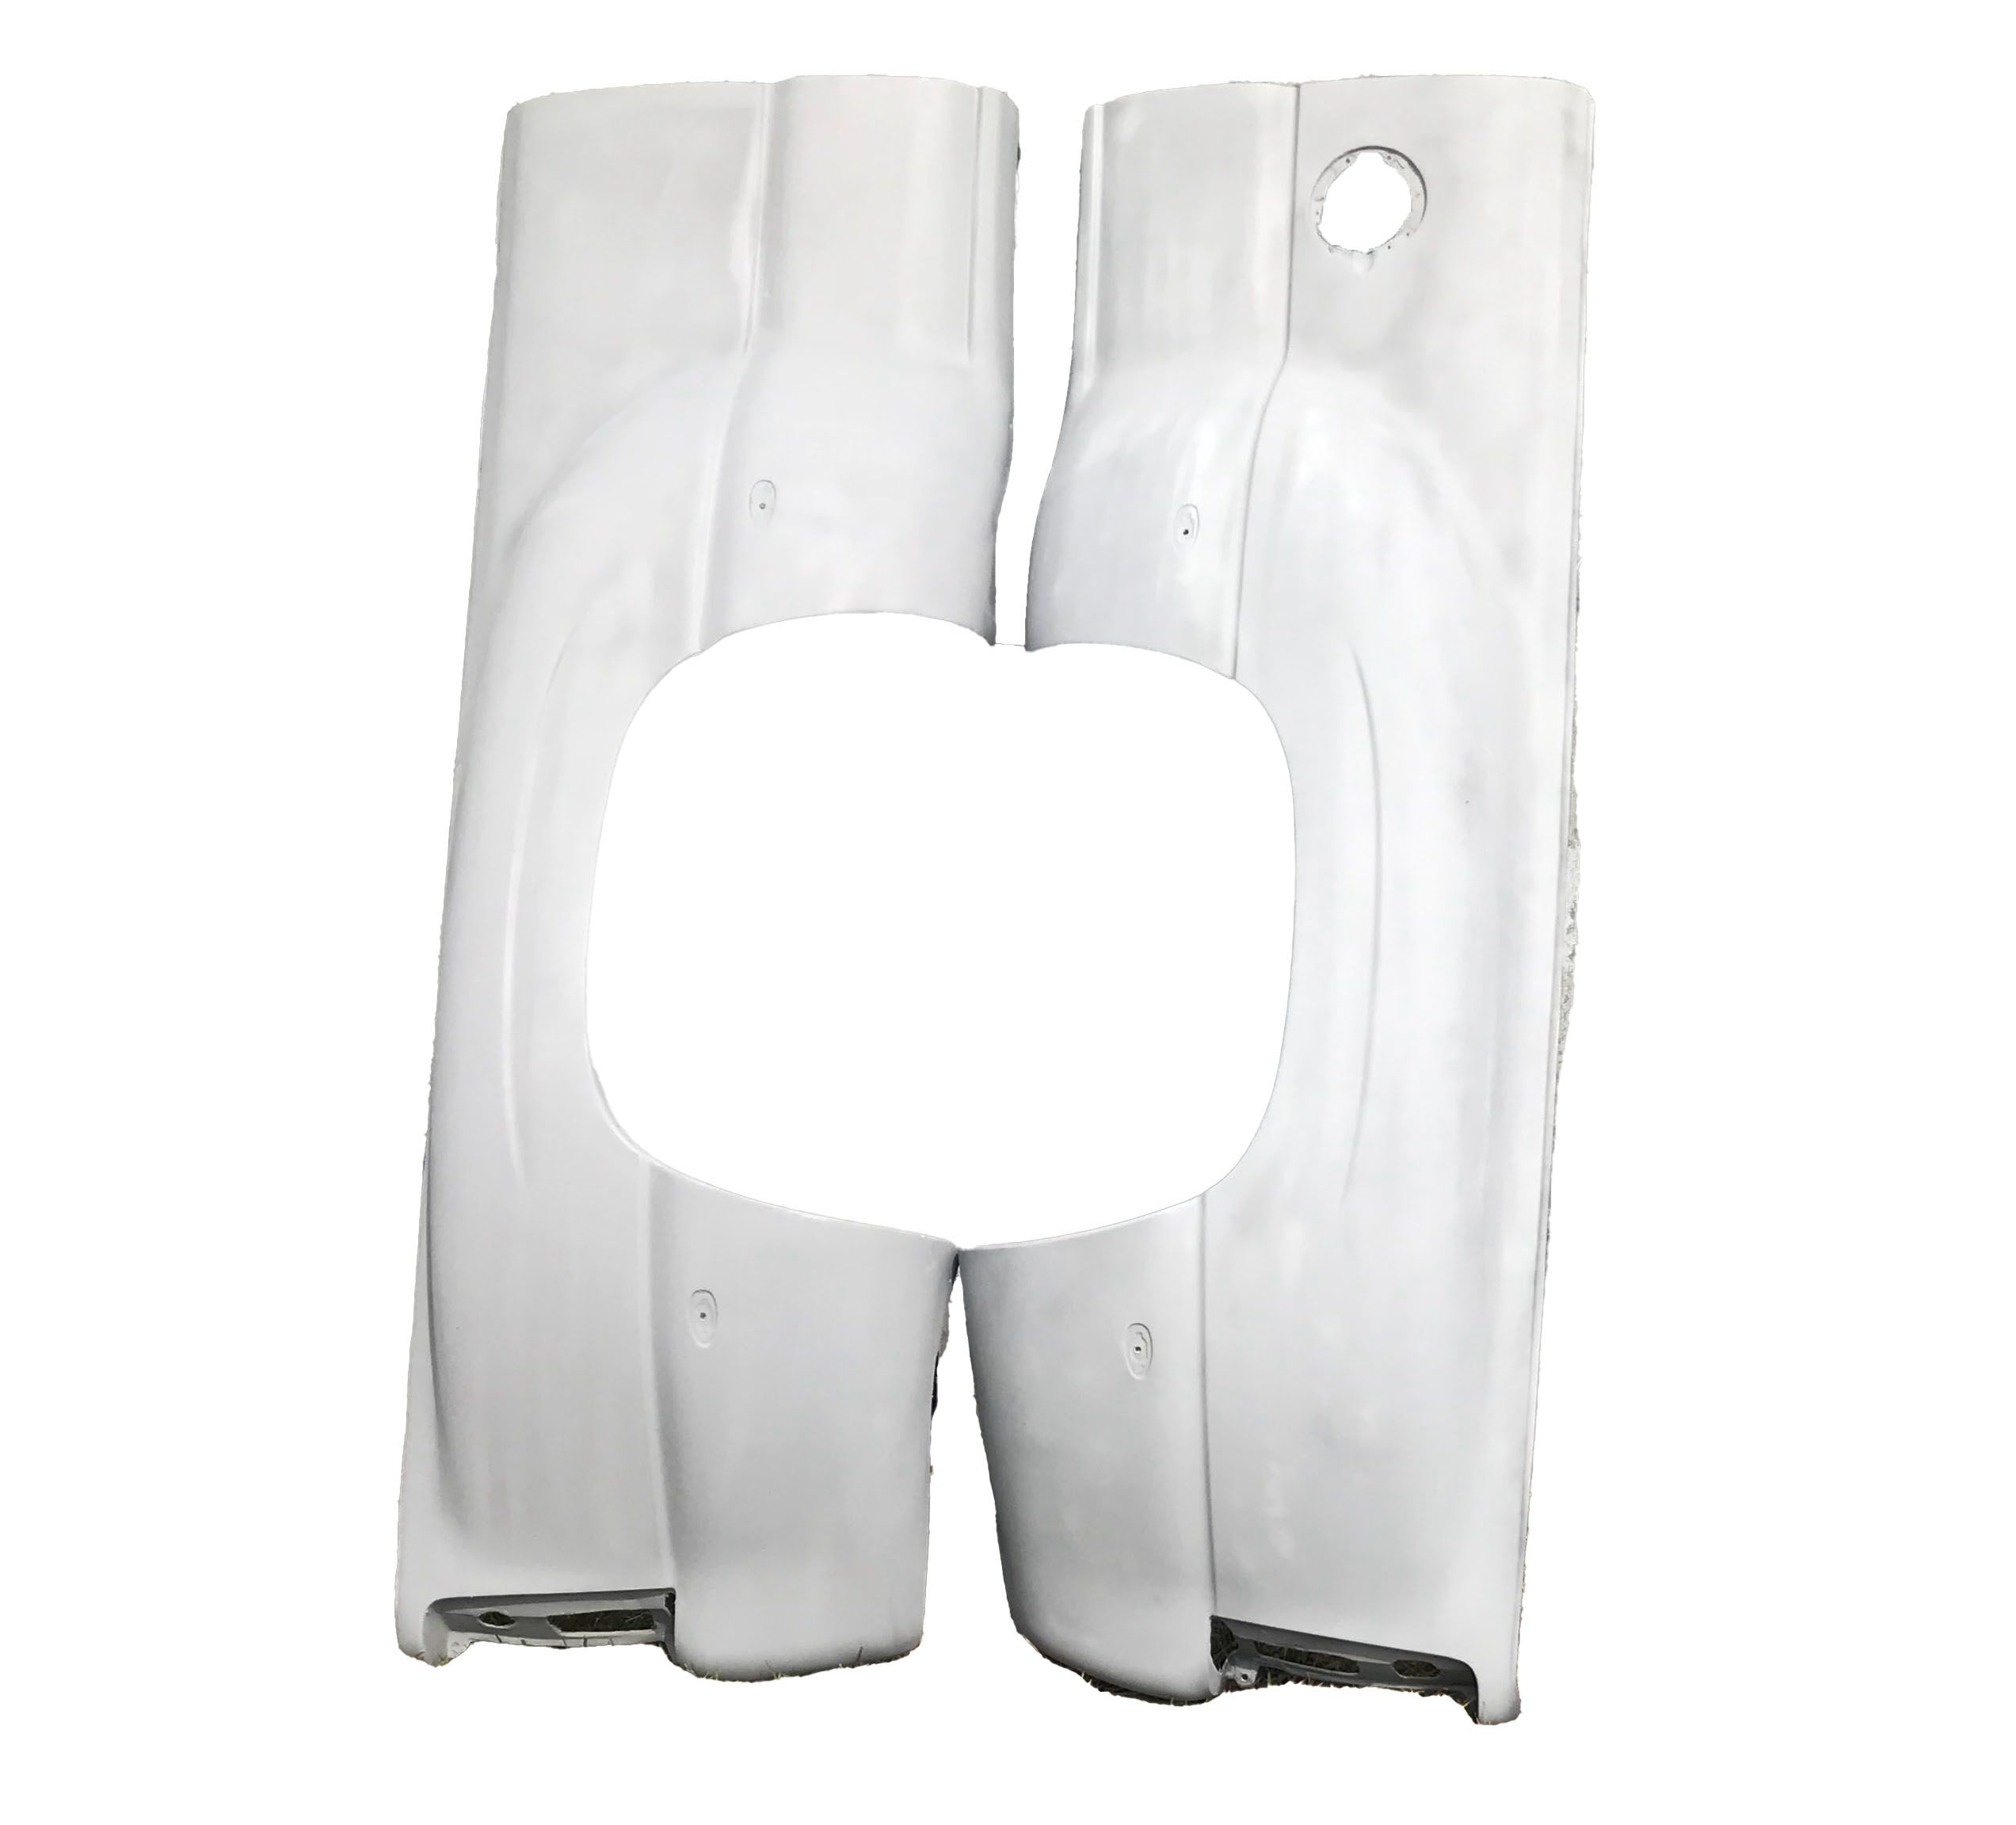 Chevy/gmc 3500 dually rear oem replacement fenders long bed 2000-2007.